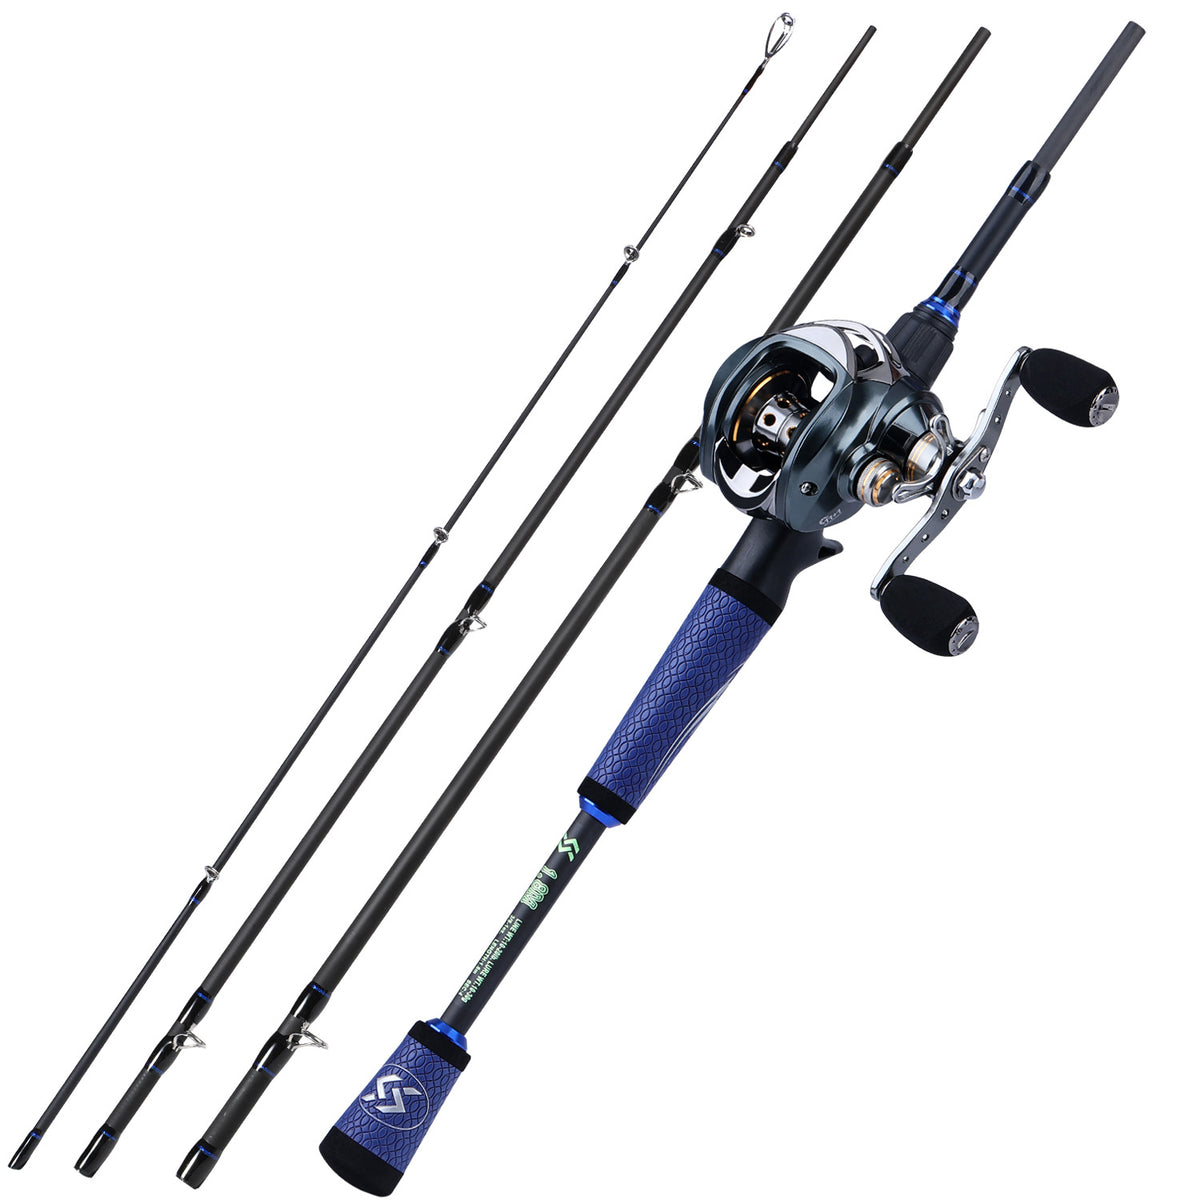 Sougayilang 1.8m- 2.4m Casting Fishing Rod Portable 4 Section Carbon